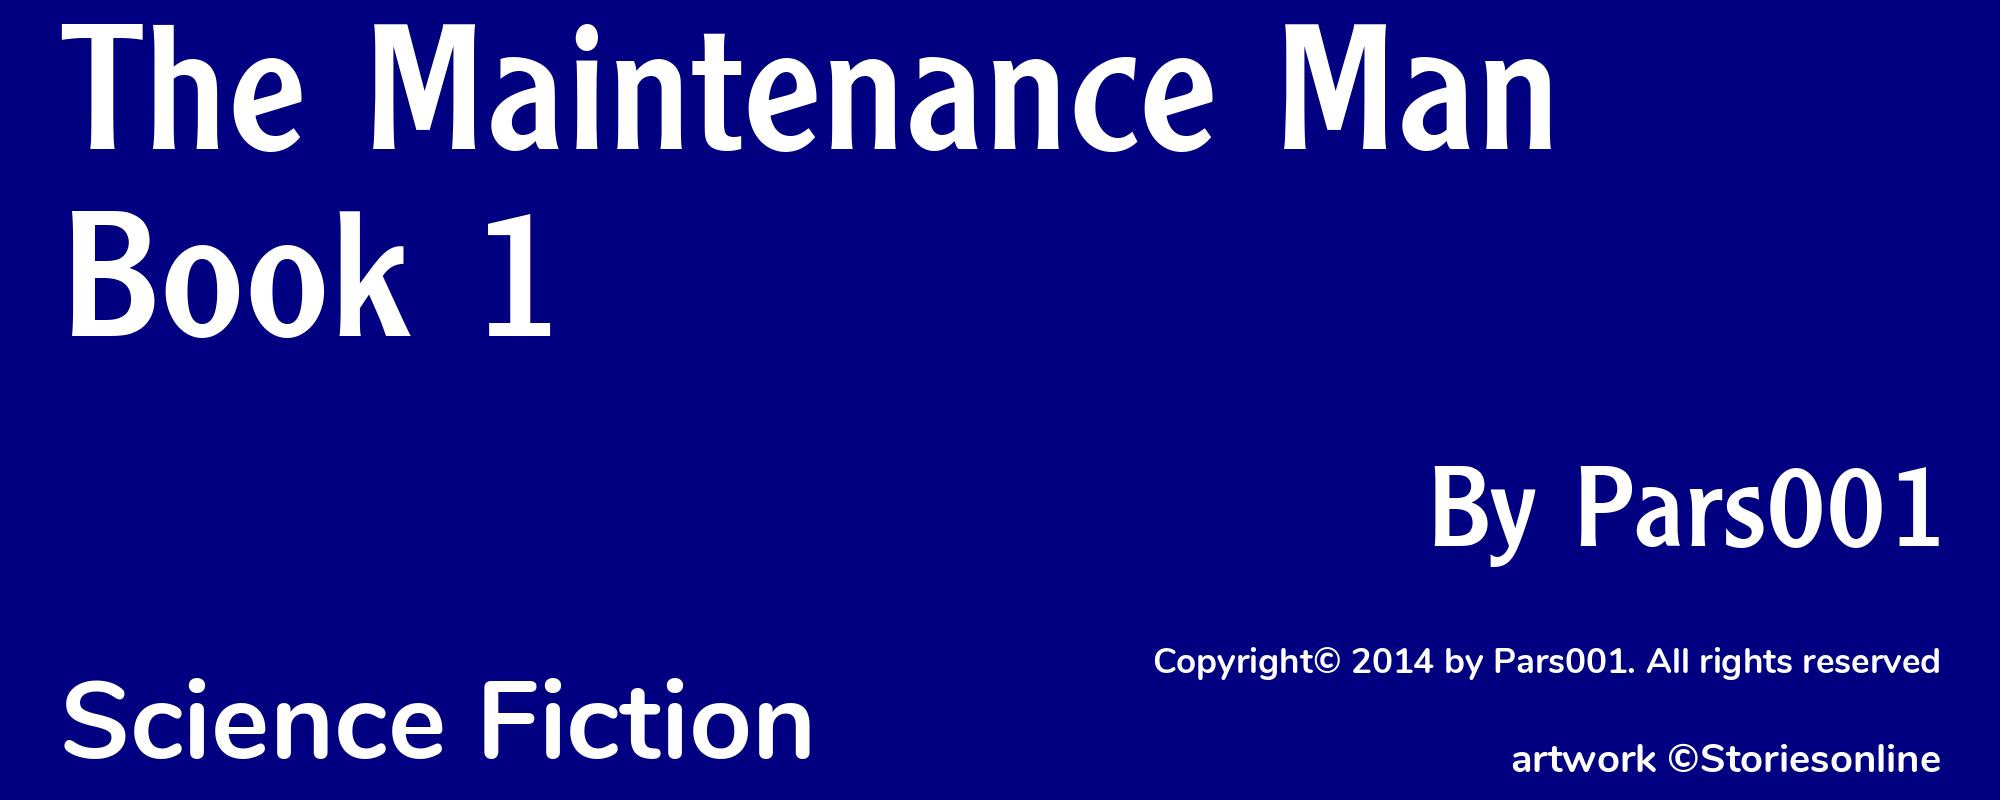 The Maintenance Man Book 1 - Cover